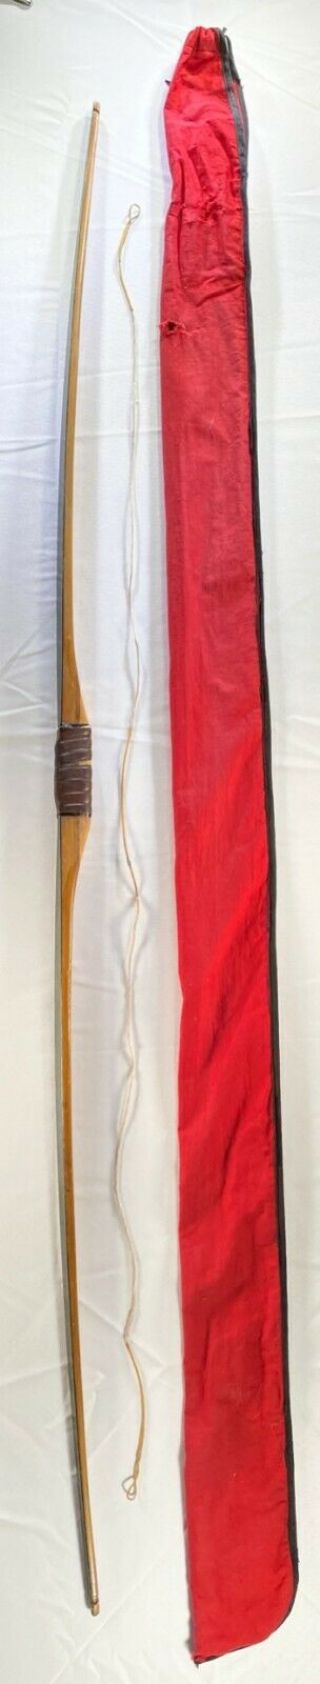 1950s Vintage Wood Longbow Bow 67 " W/ Case & String Leather Grip